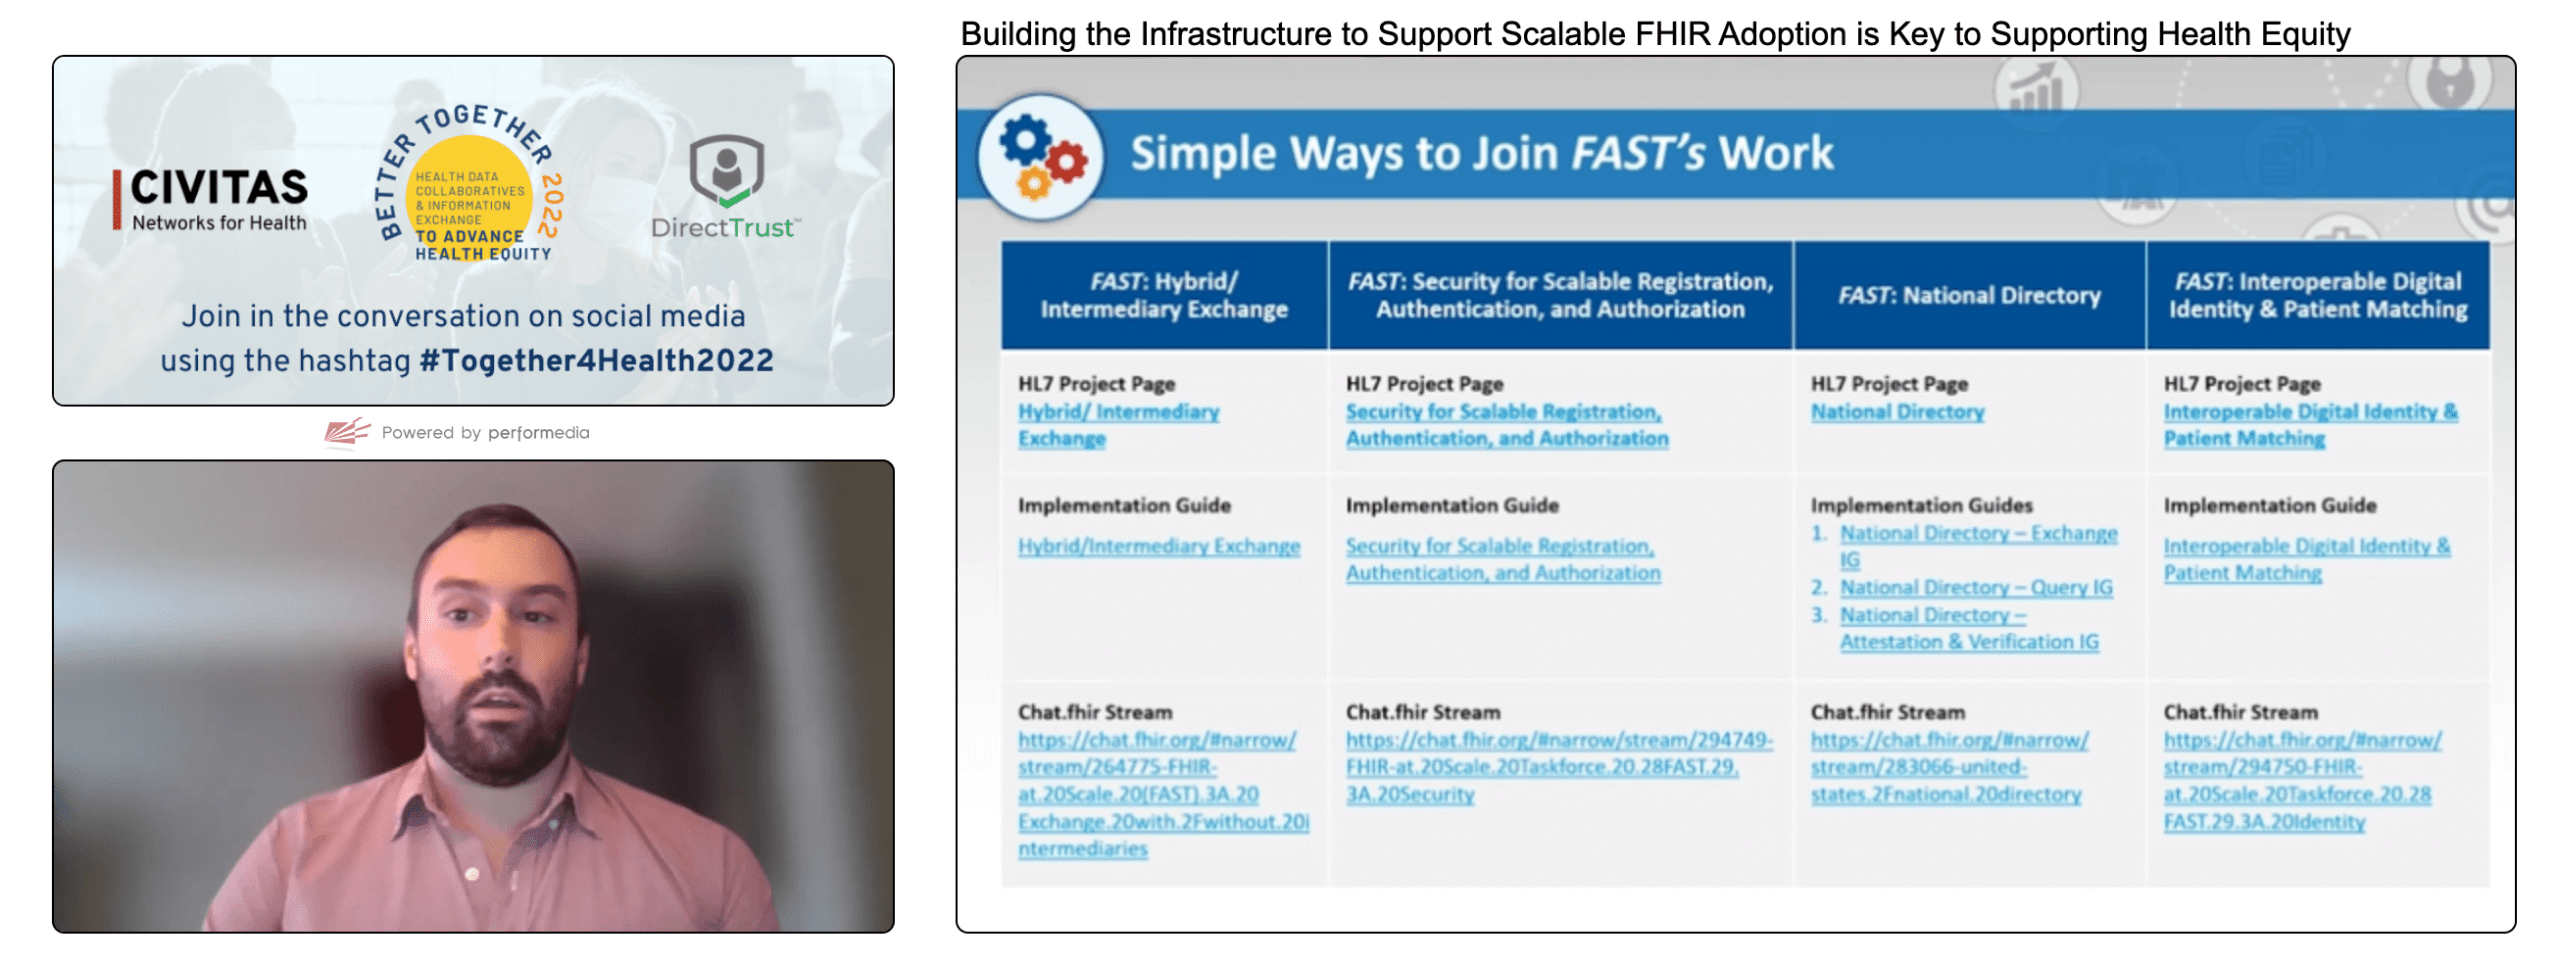 Building the Infrastructure to Support Scalable FHIR Adoption is Key to Supporting Health Equity